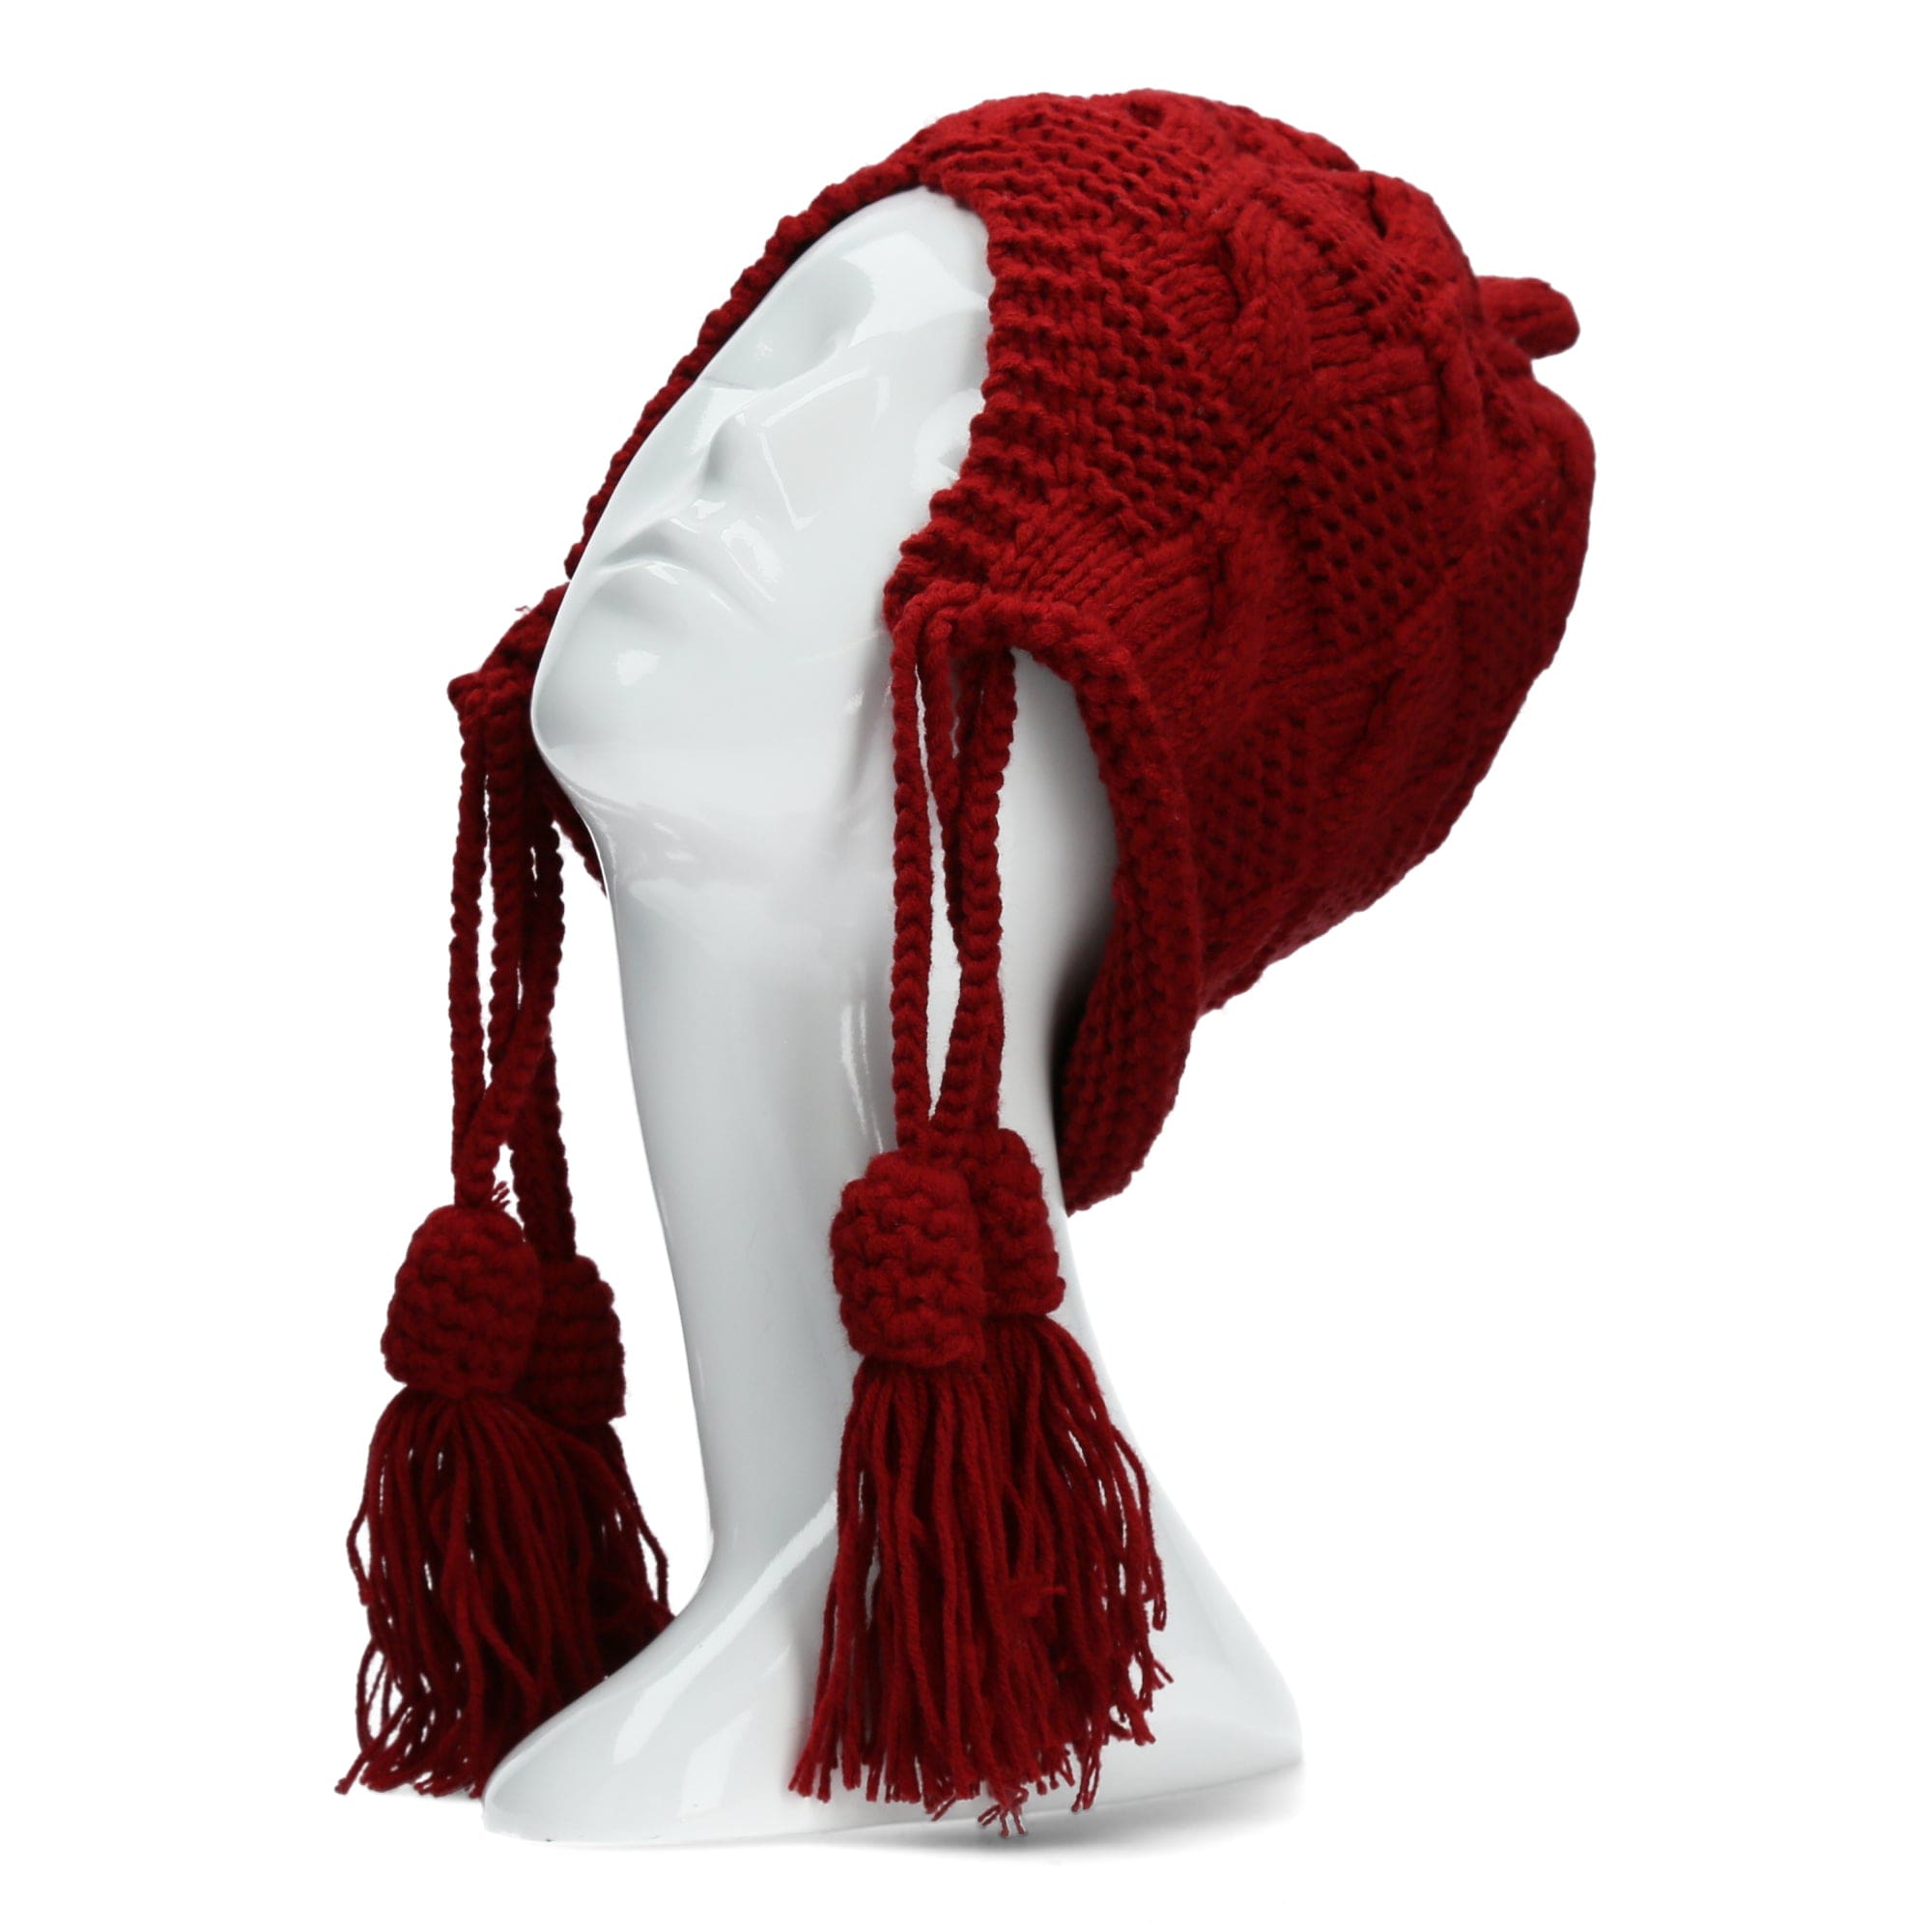 Ethnic red knit hat - Hats